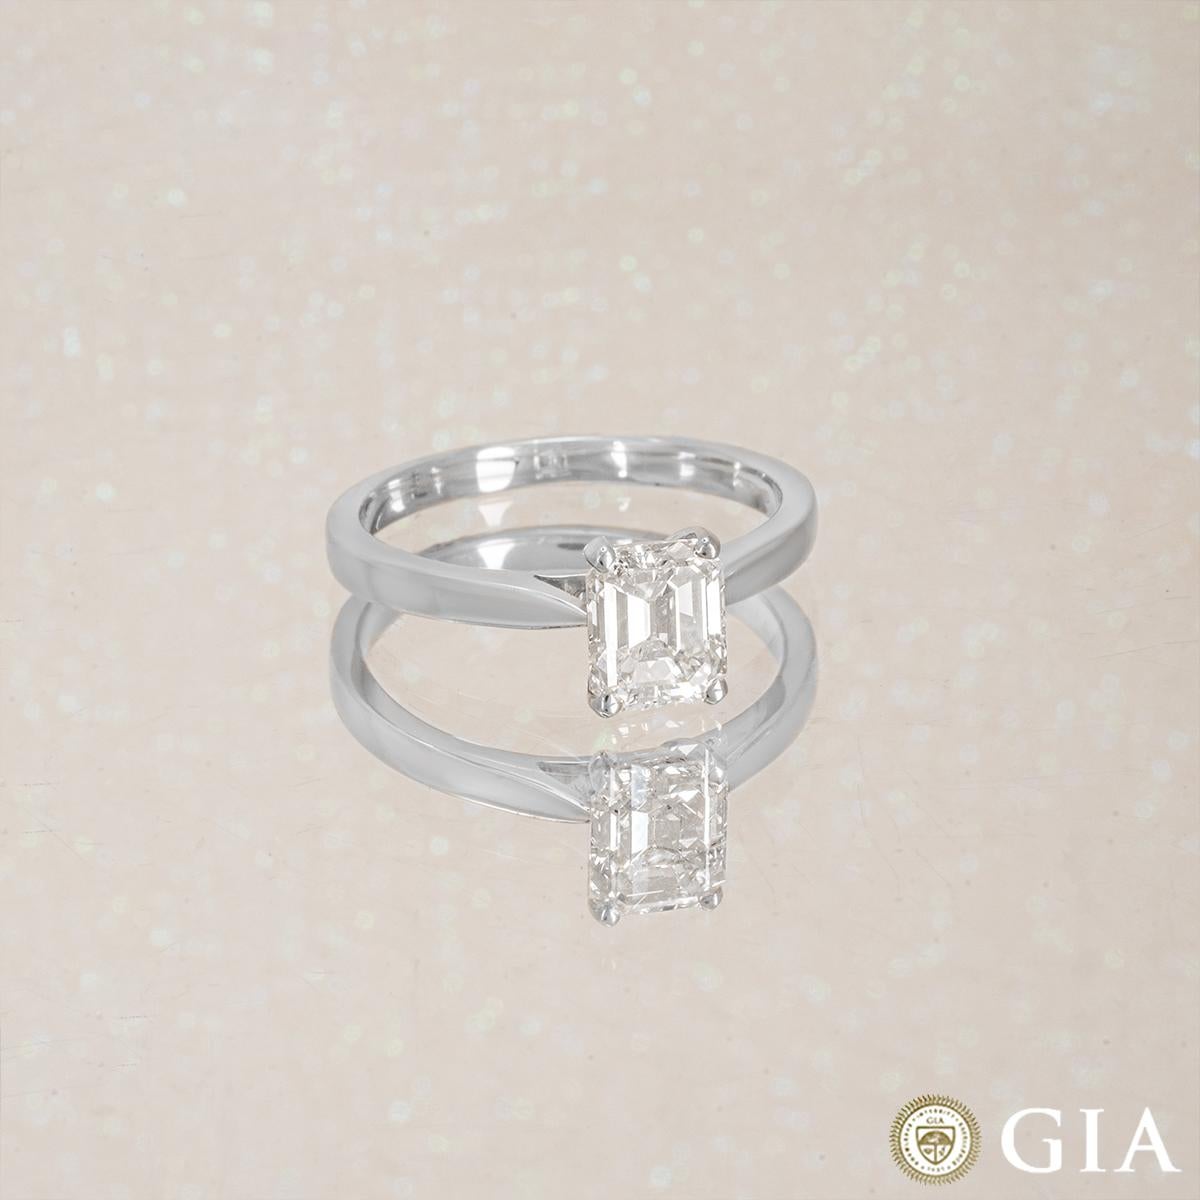 GIA Certified Emerald Cut Diamond Solitaire Engagement Ring 1.25 Carat For Sale 1